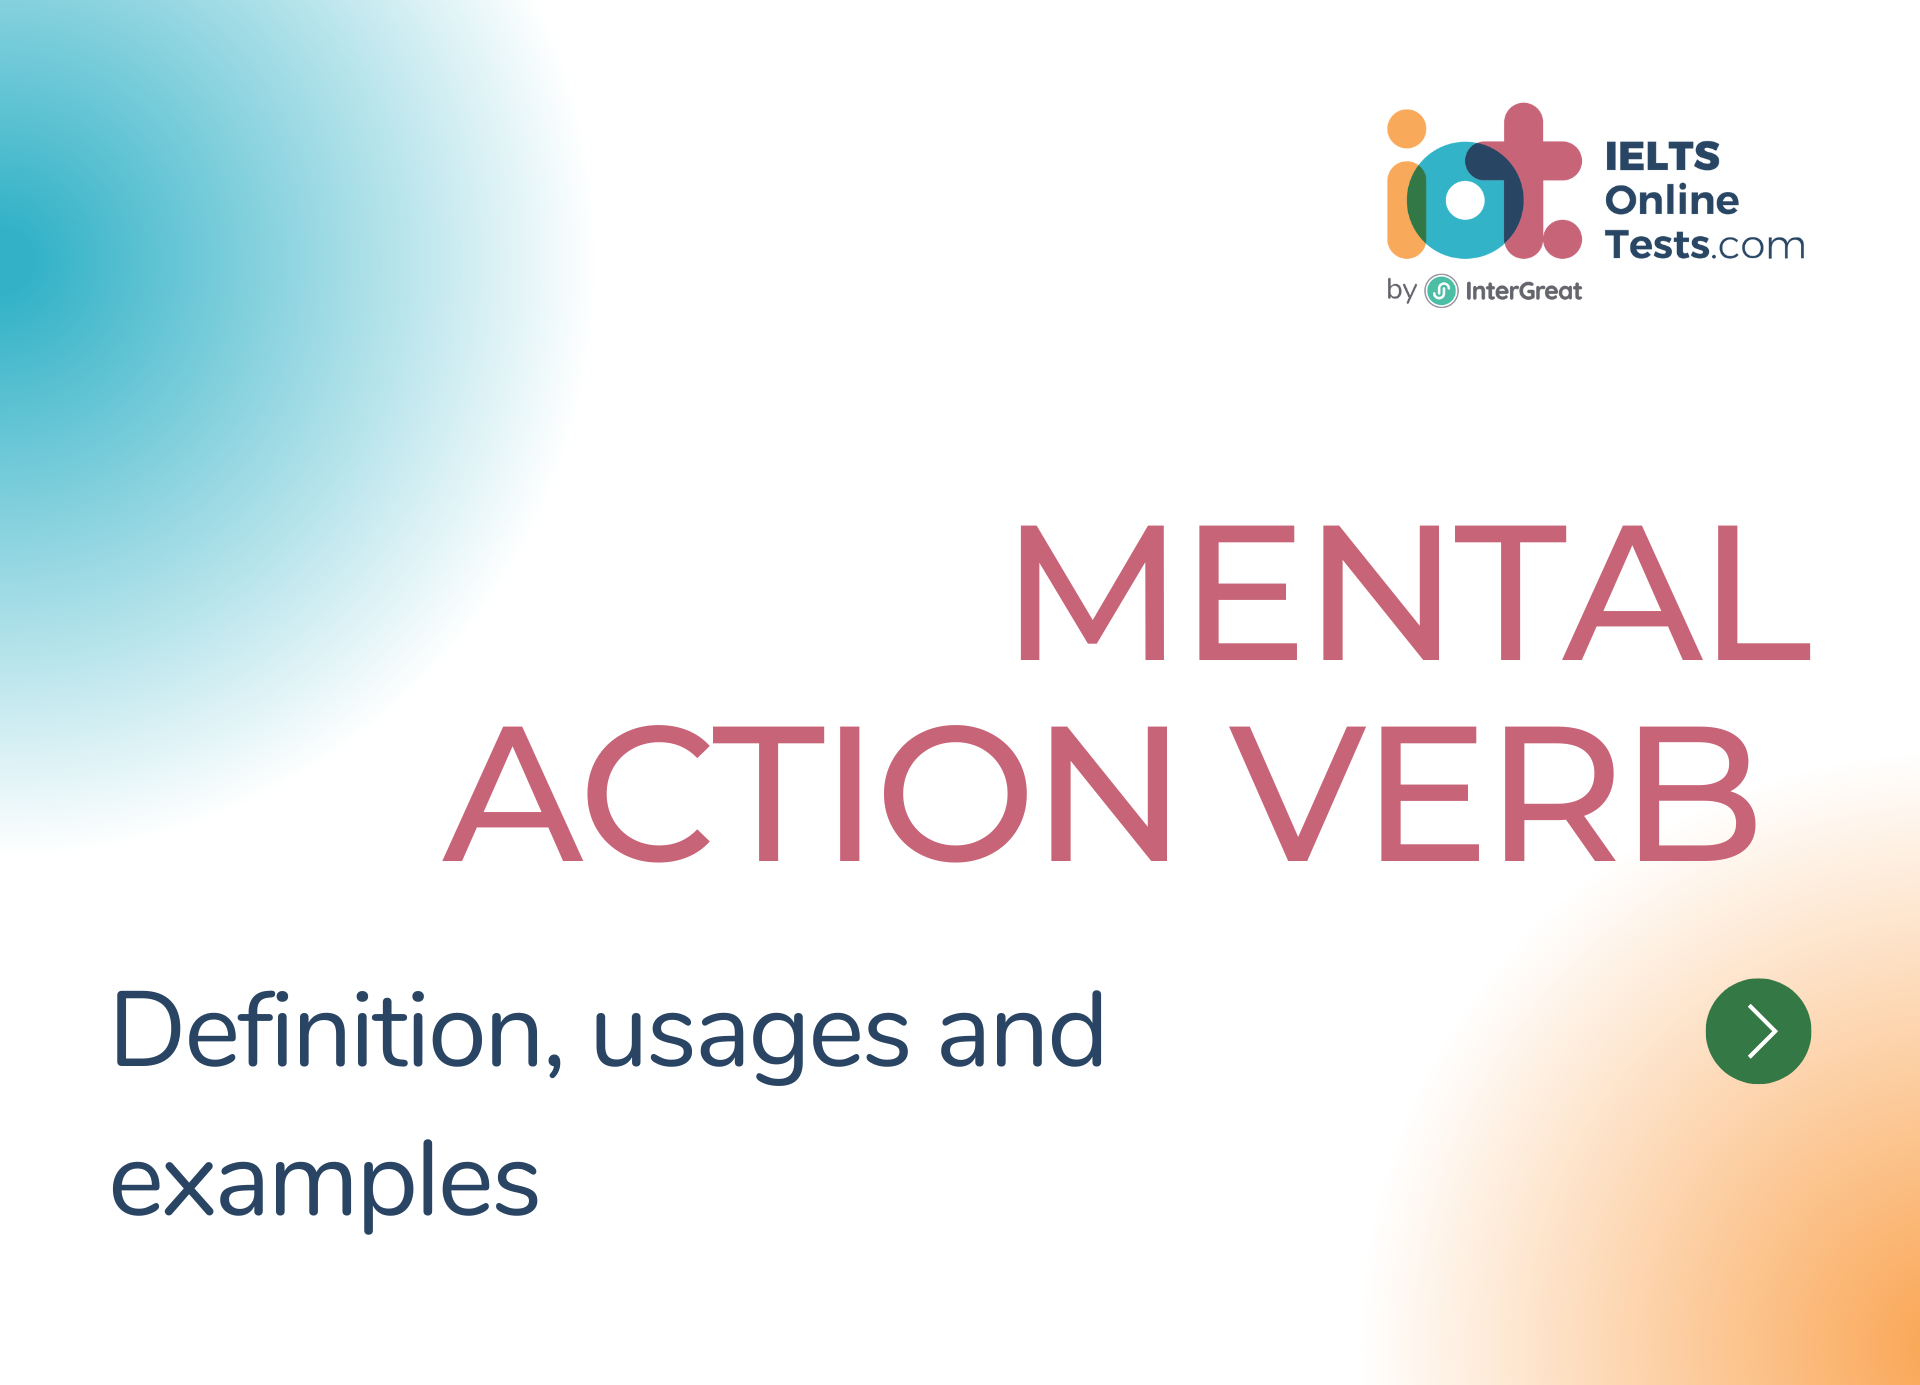 Mental action verb definition and examples